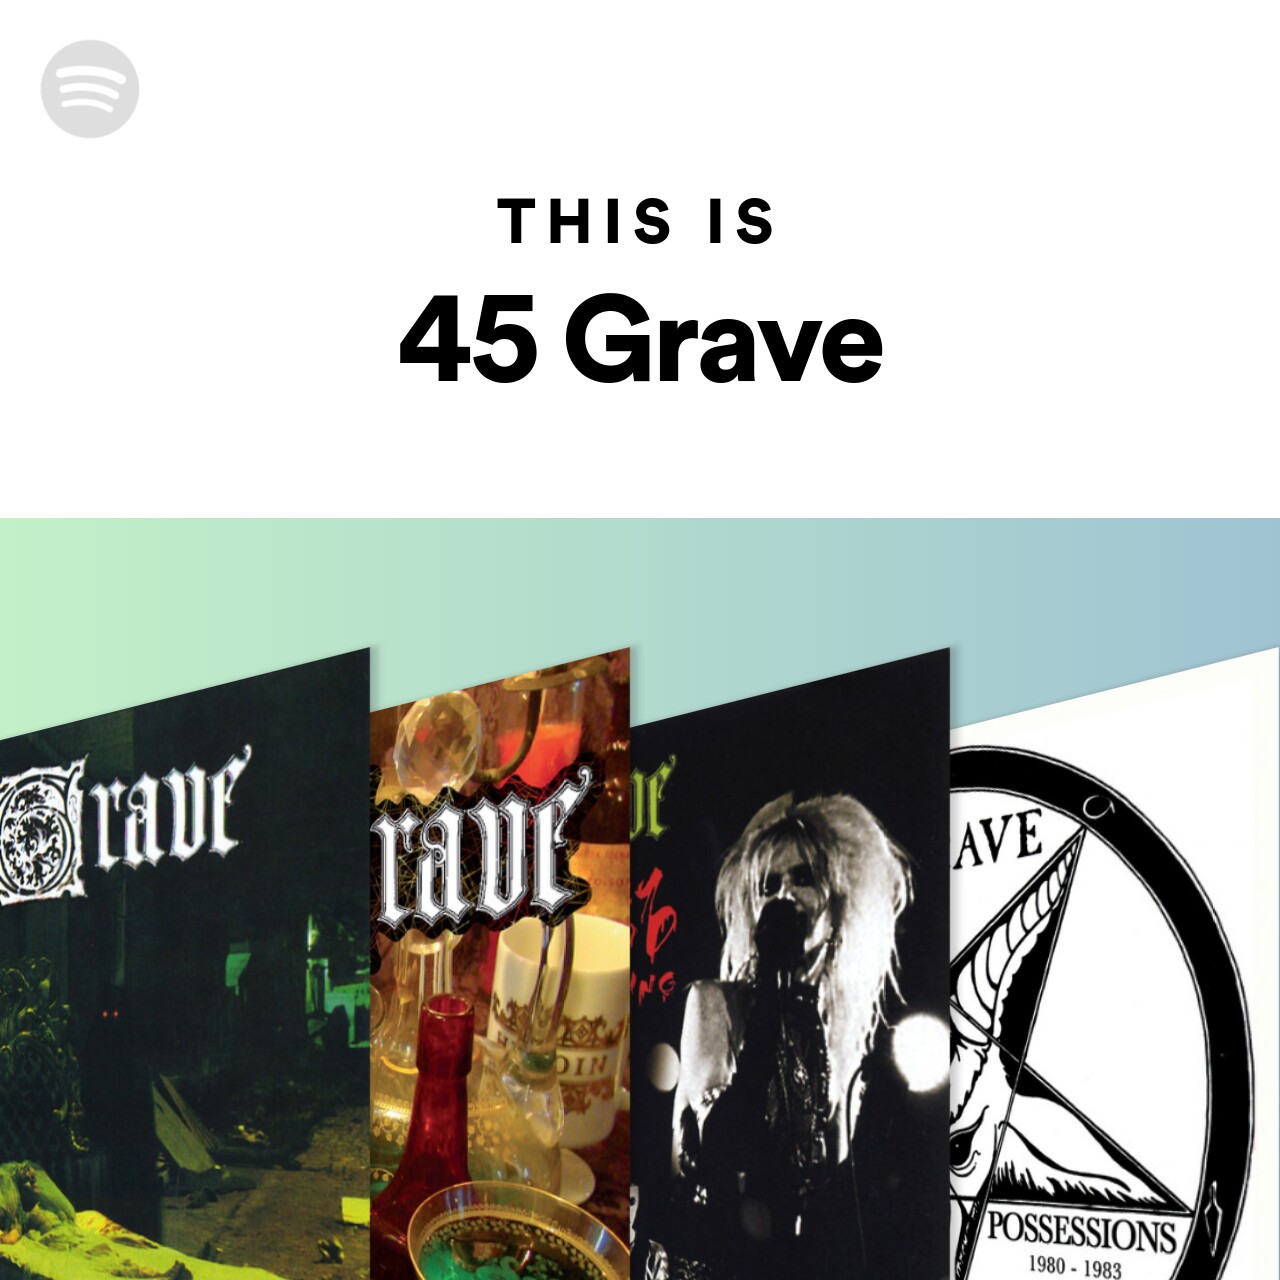 This Is 45 Grave